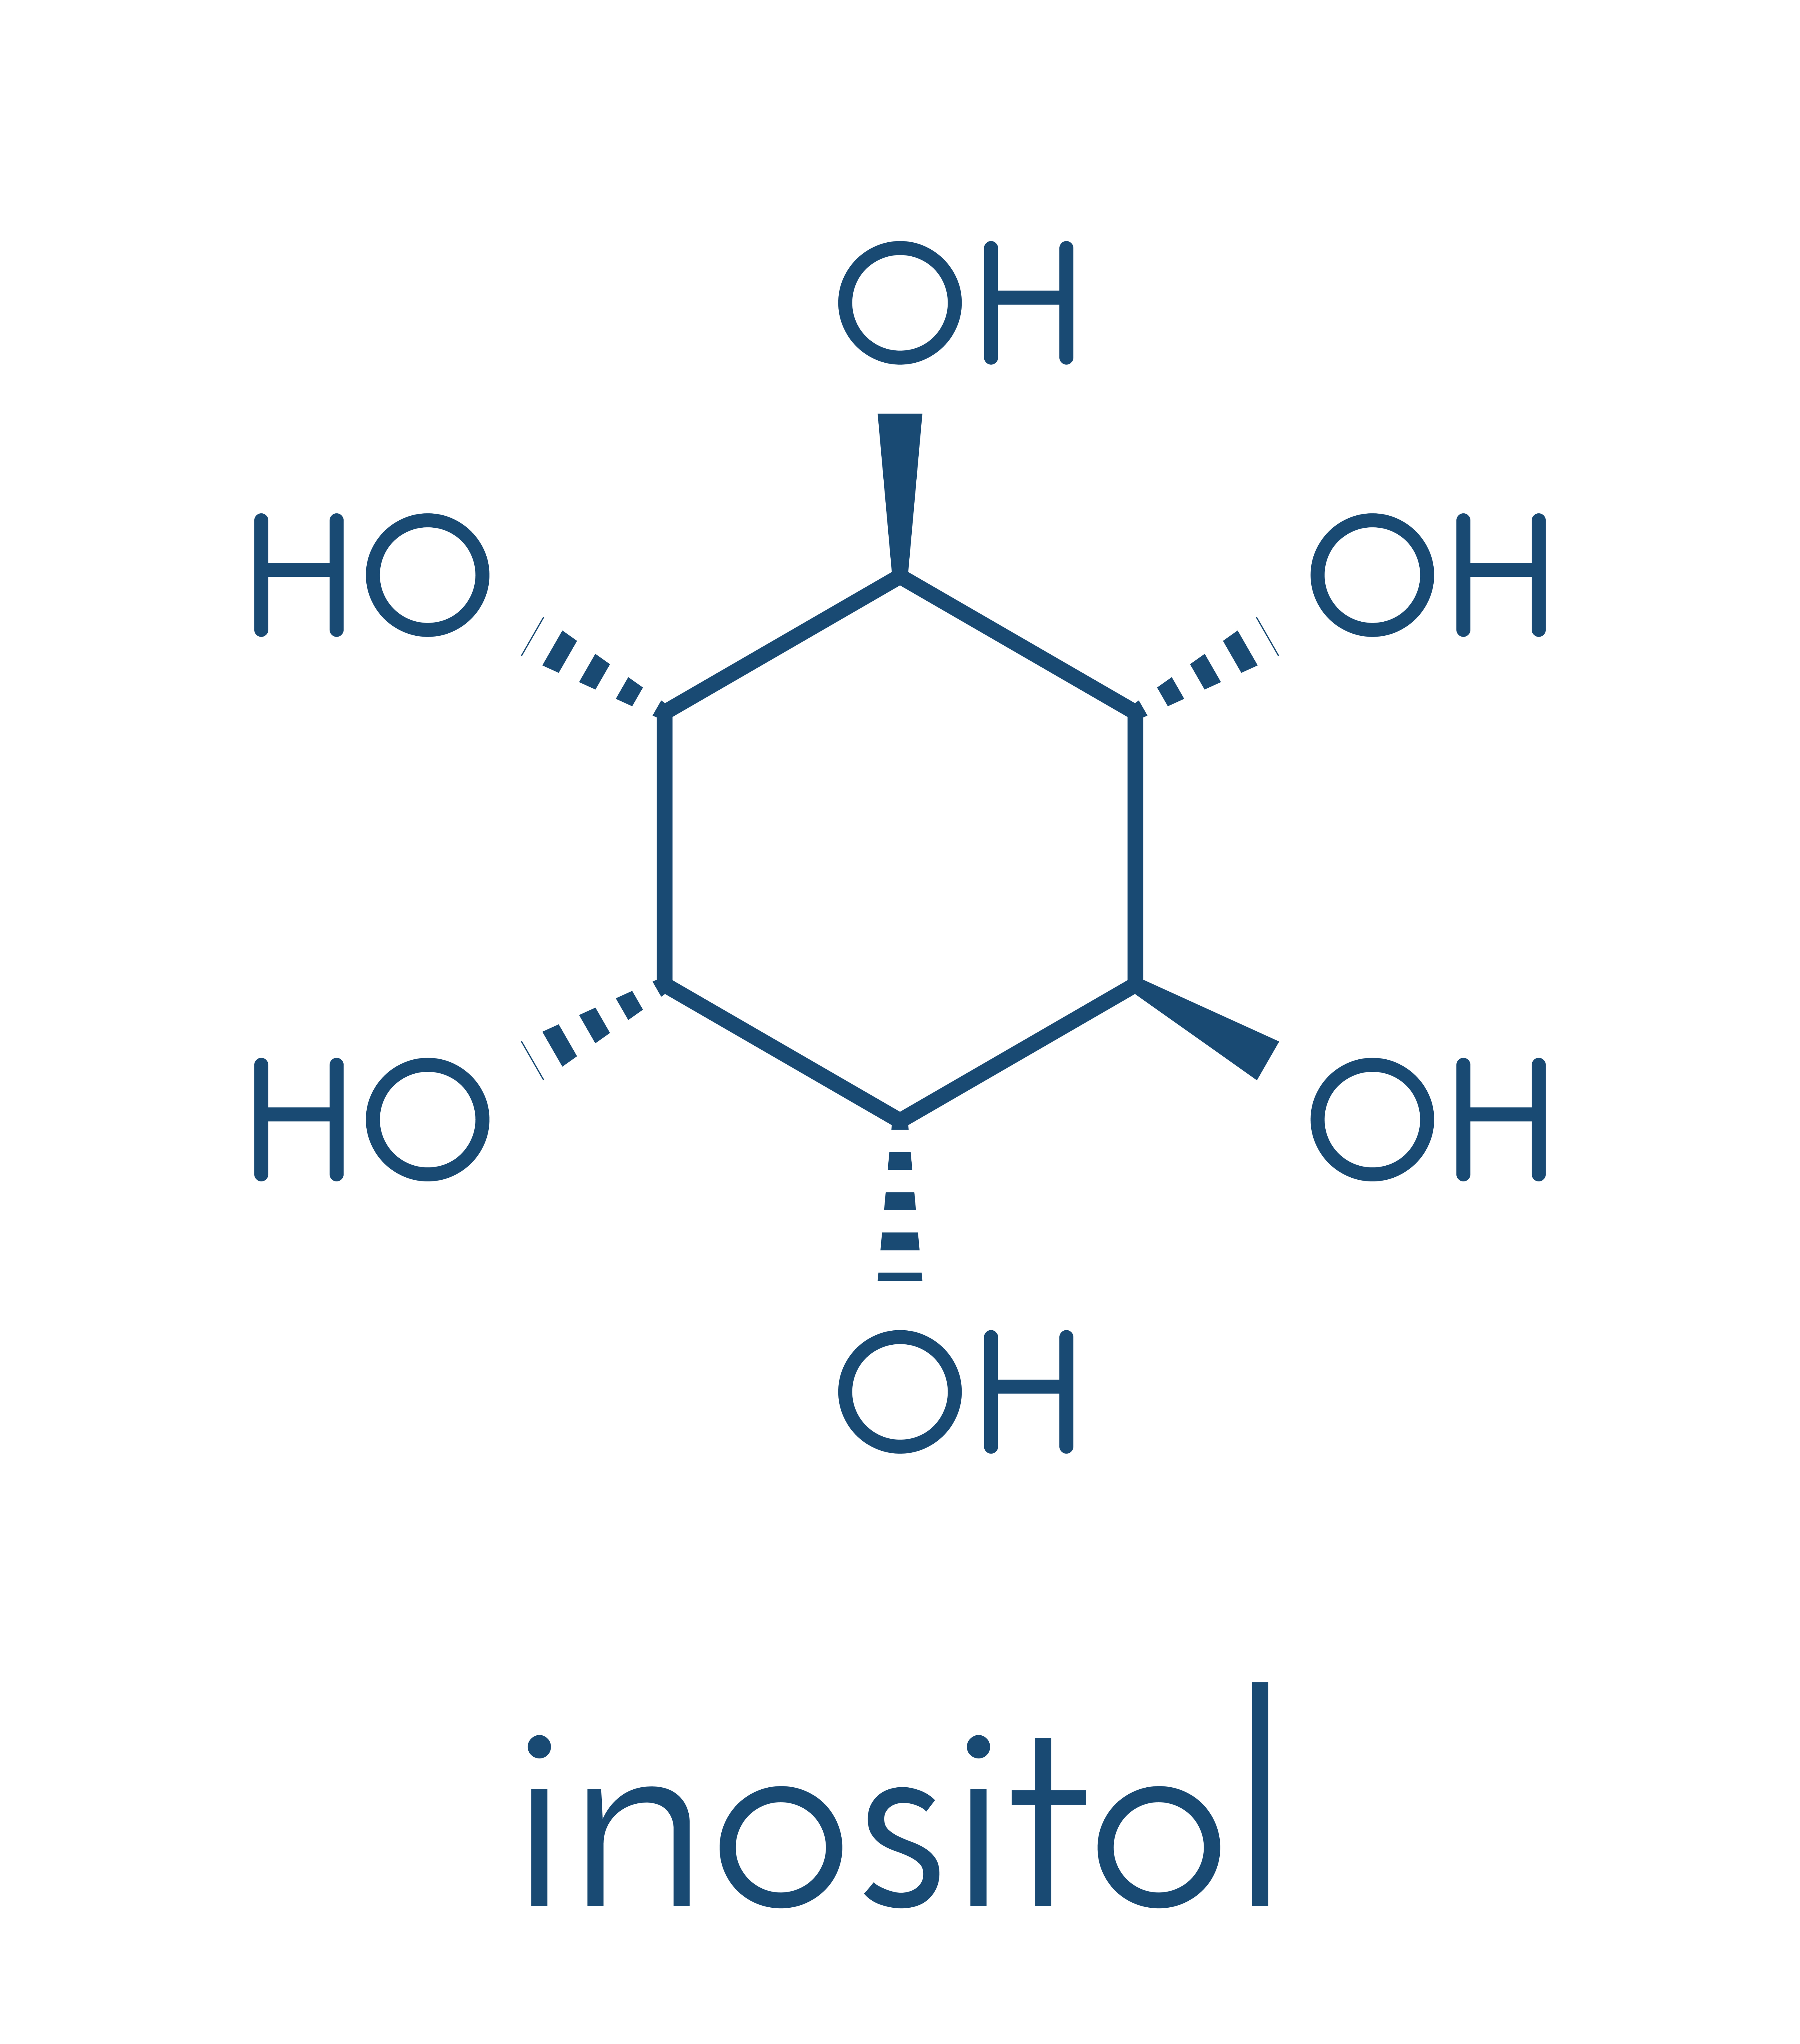 Inositol, it's often forget compound, which has many benefits, mainly those related to boosting your mood